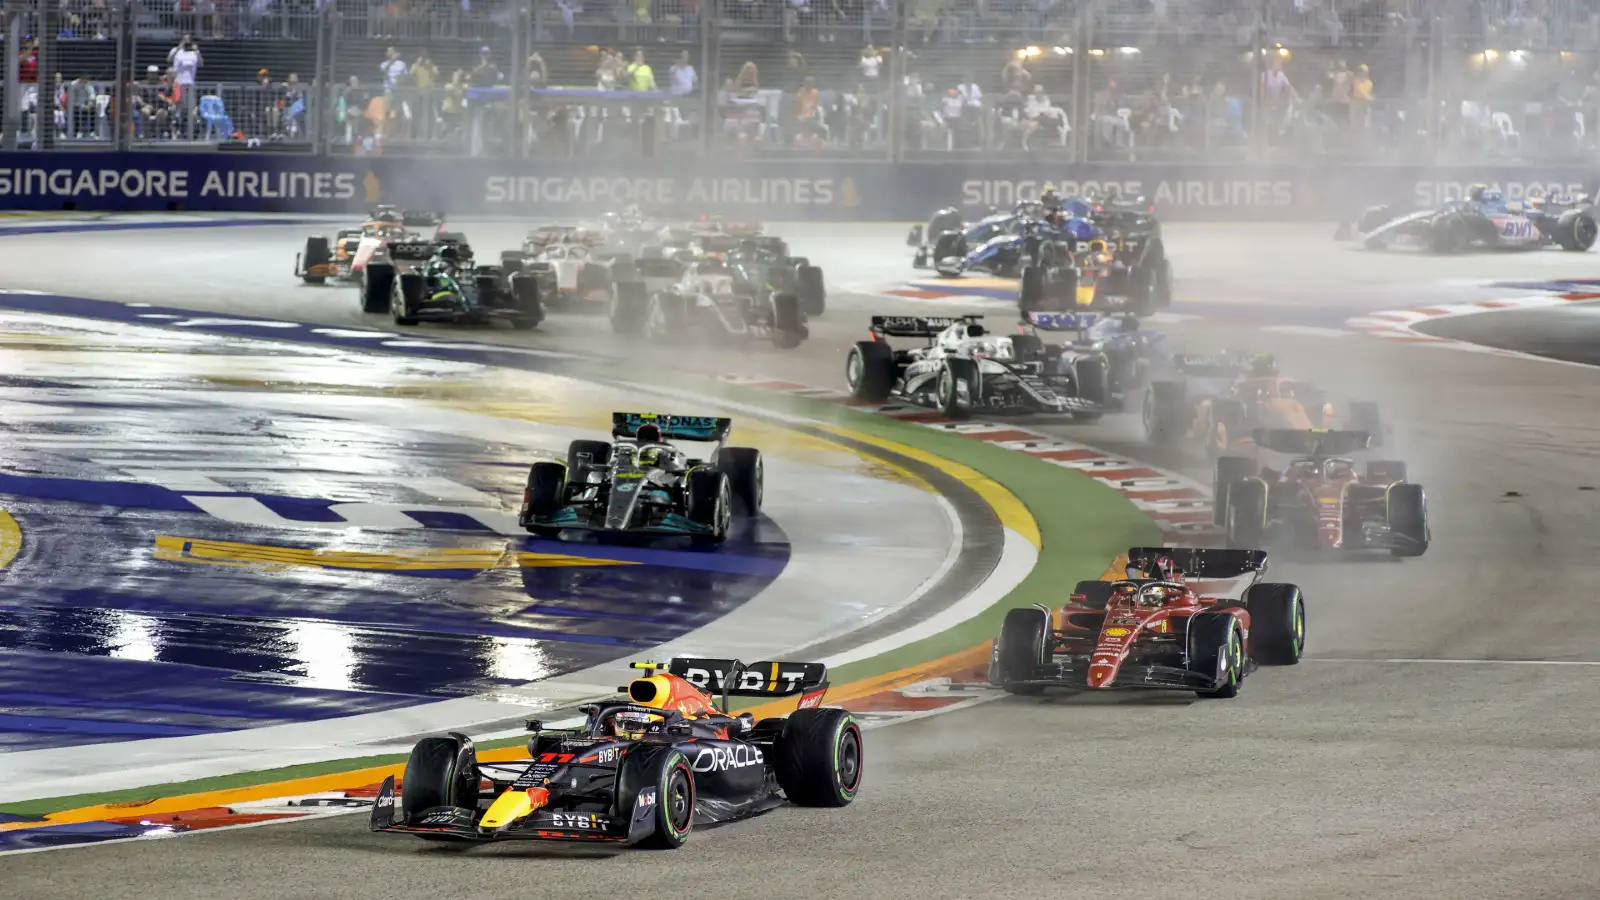 Red Bull Sergio Perez leads the pack at the Singapore Grand Prix. Marina Bay, October 2022. Budget cap